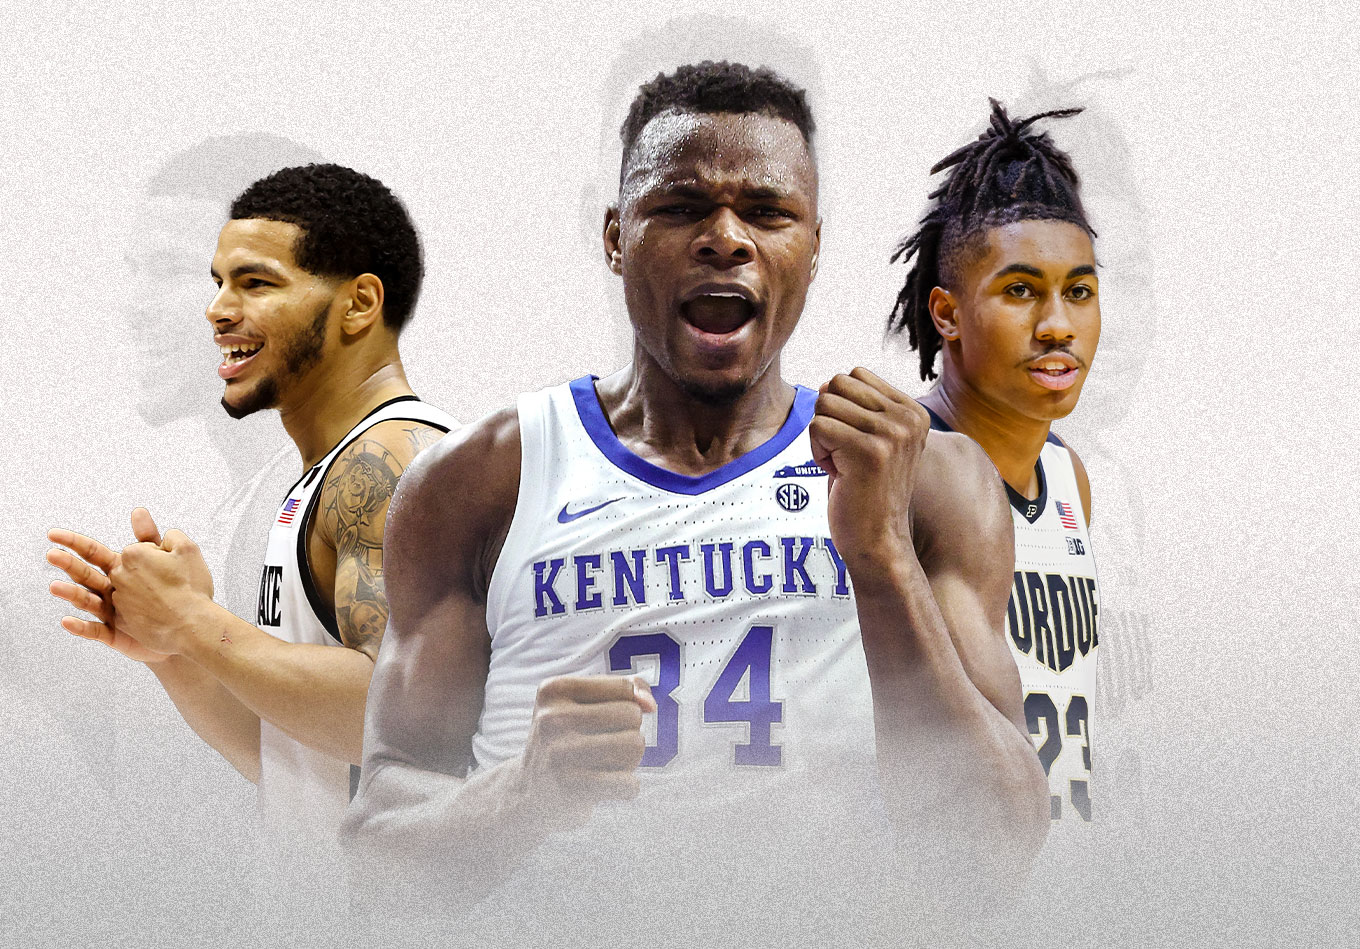 Alabama’s Wild Ride, Kentucky’s Statement, and Other Developments in This Week’s TRACR Rankings